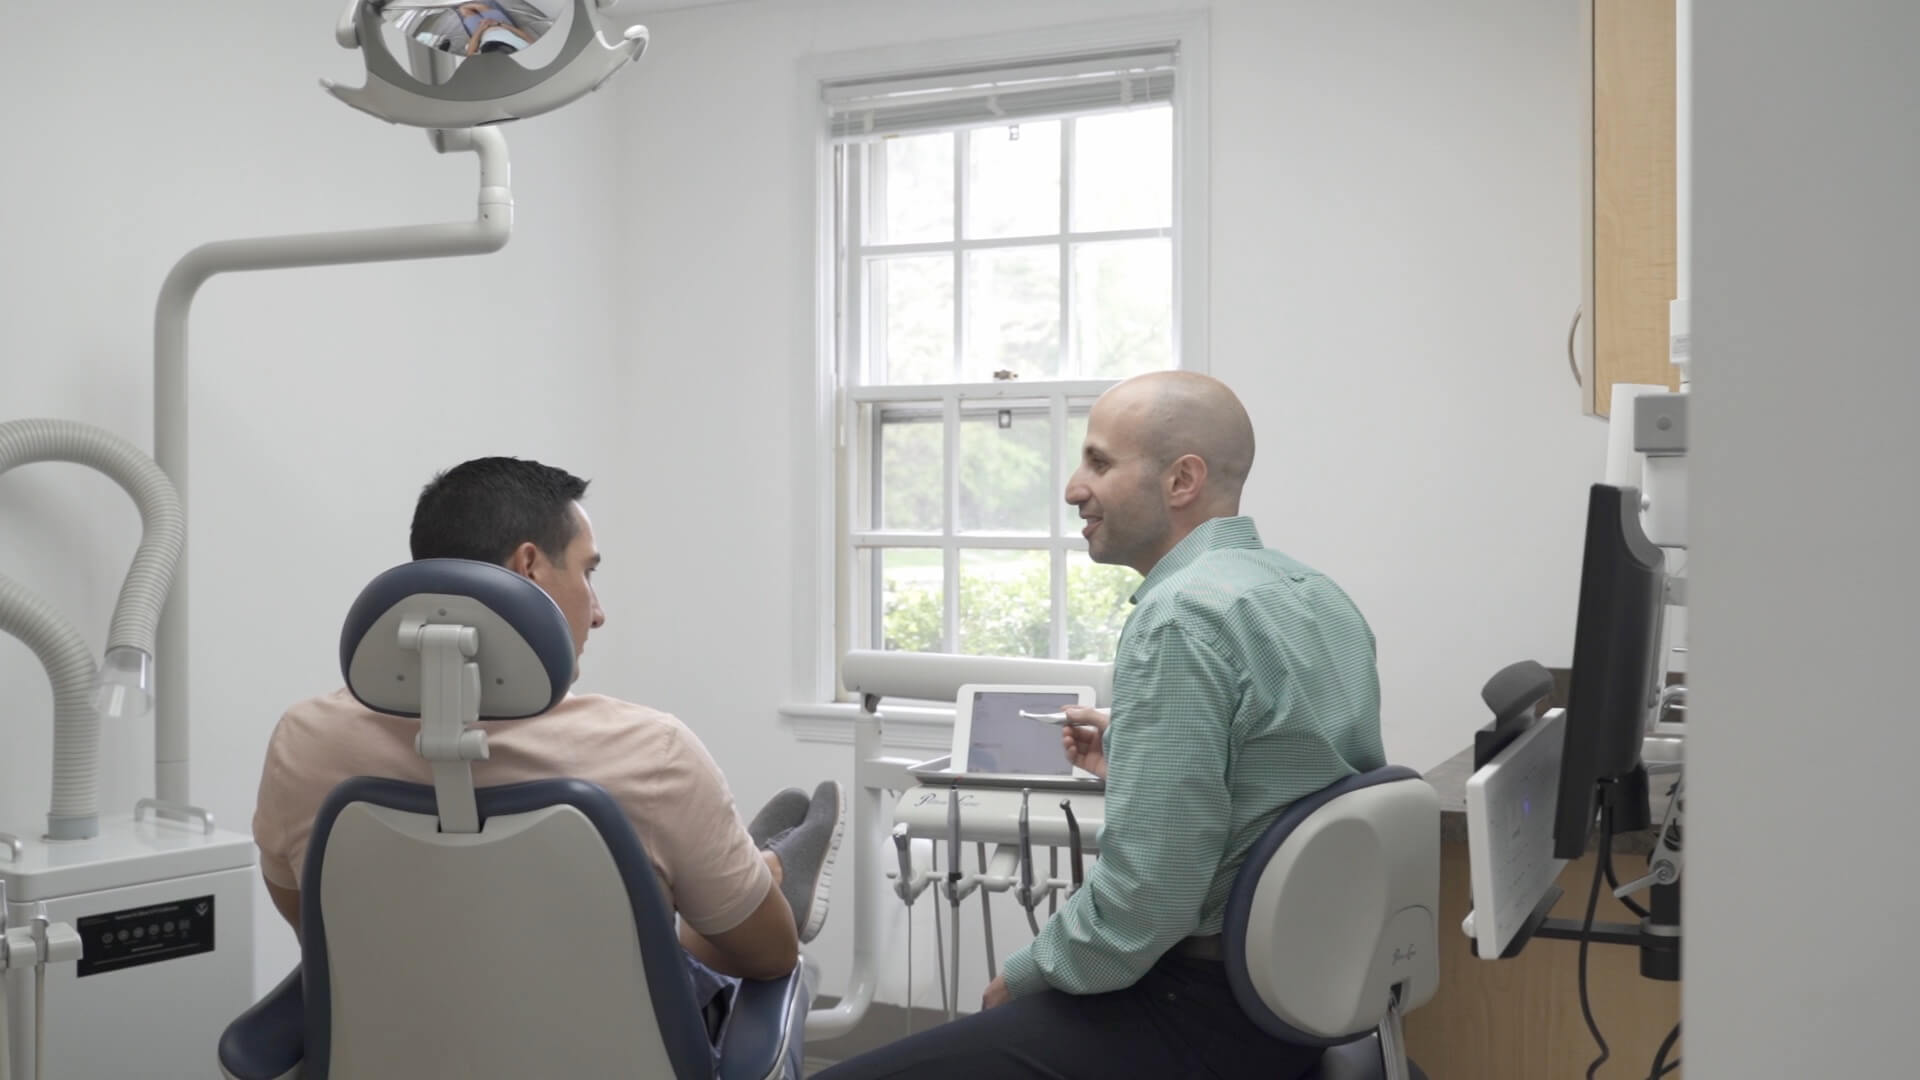 Dr. Dahman with a patient in a dentist chair